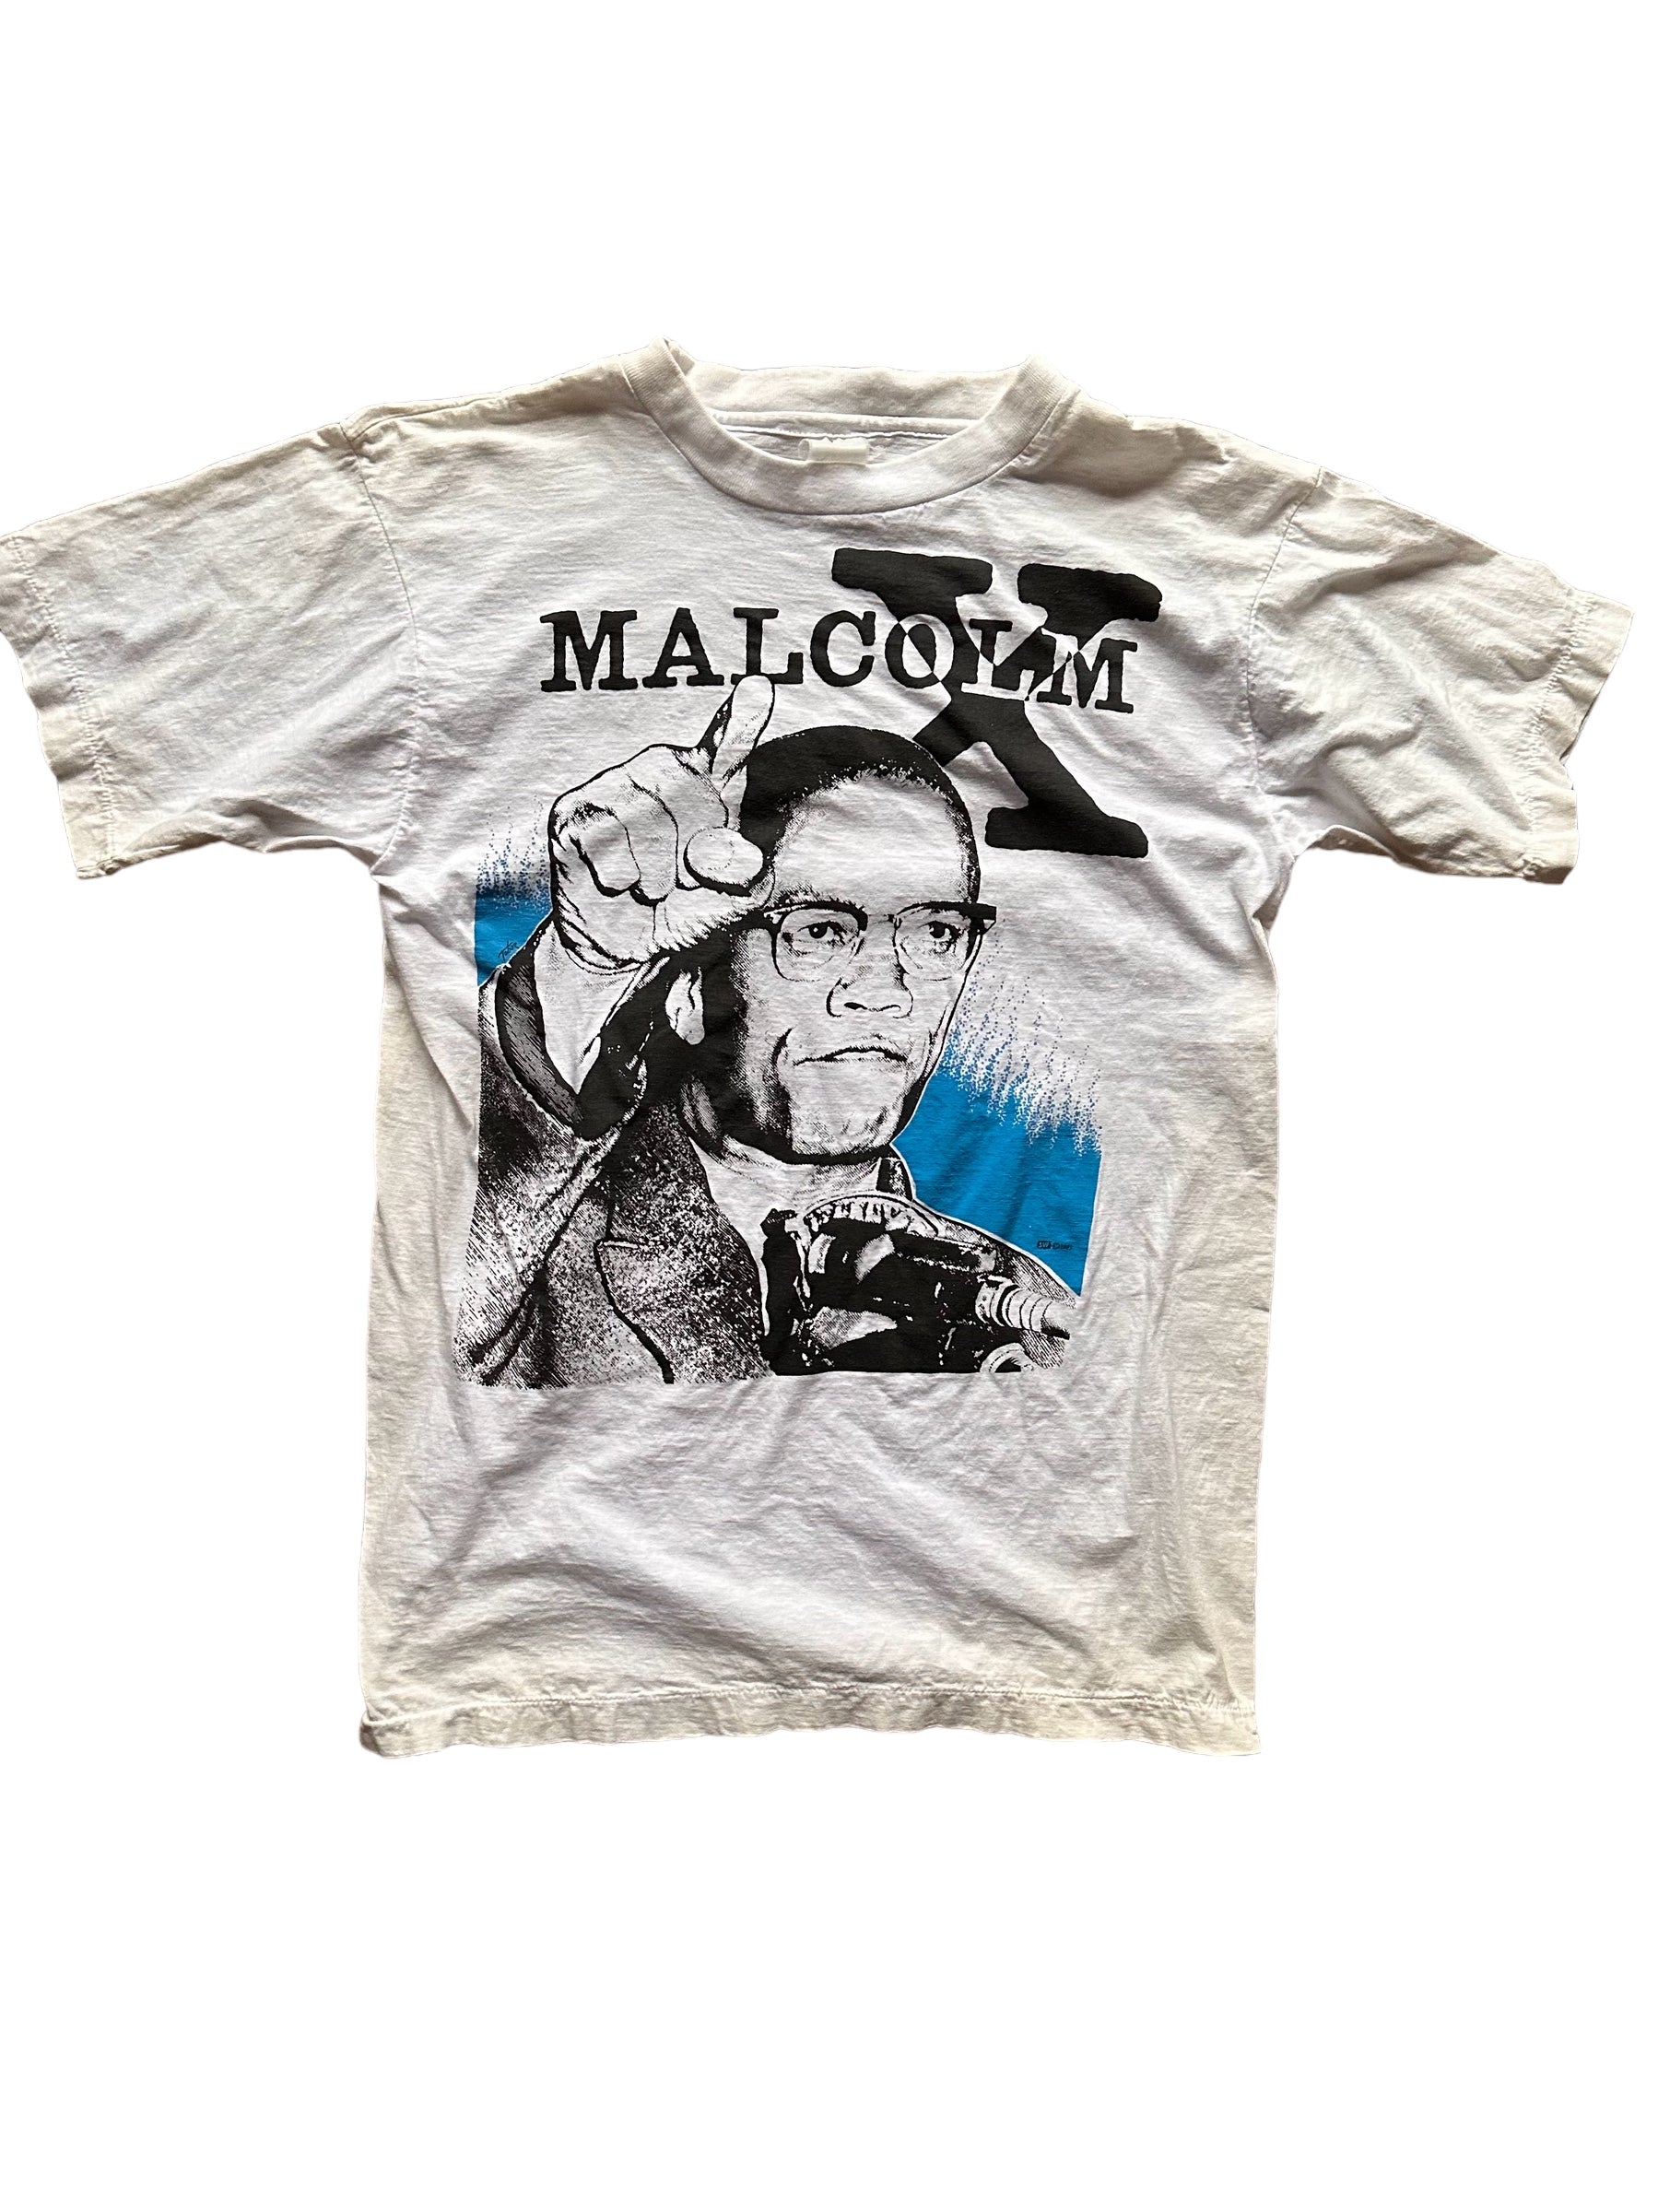 Front View of Vintage 1991 Malcolm X Single Stitch Tee SZ M | Vintage Malcolm X T-Shirts Seattle | Barn Owl Vintage Clothing Seattle